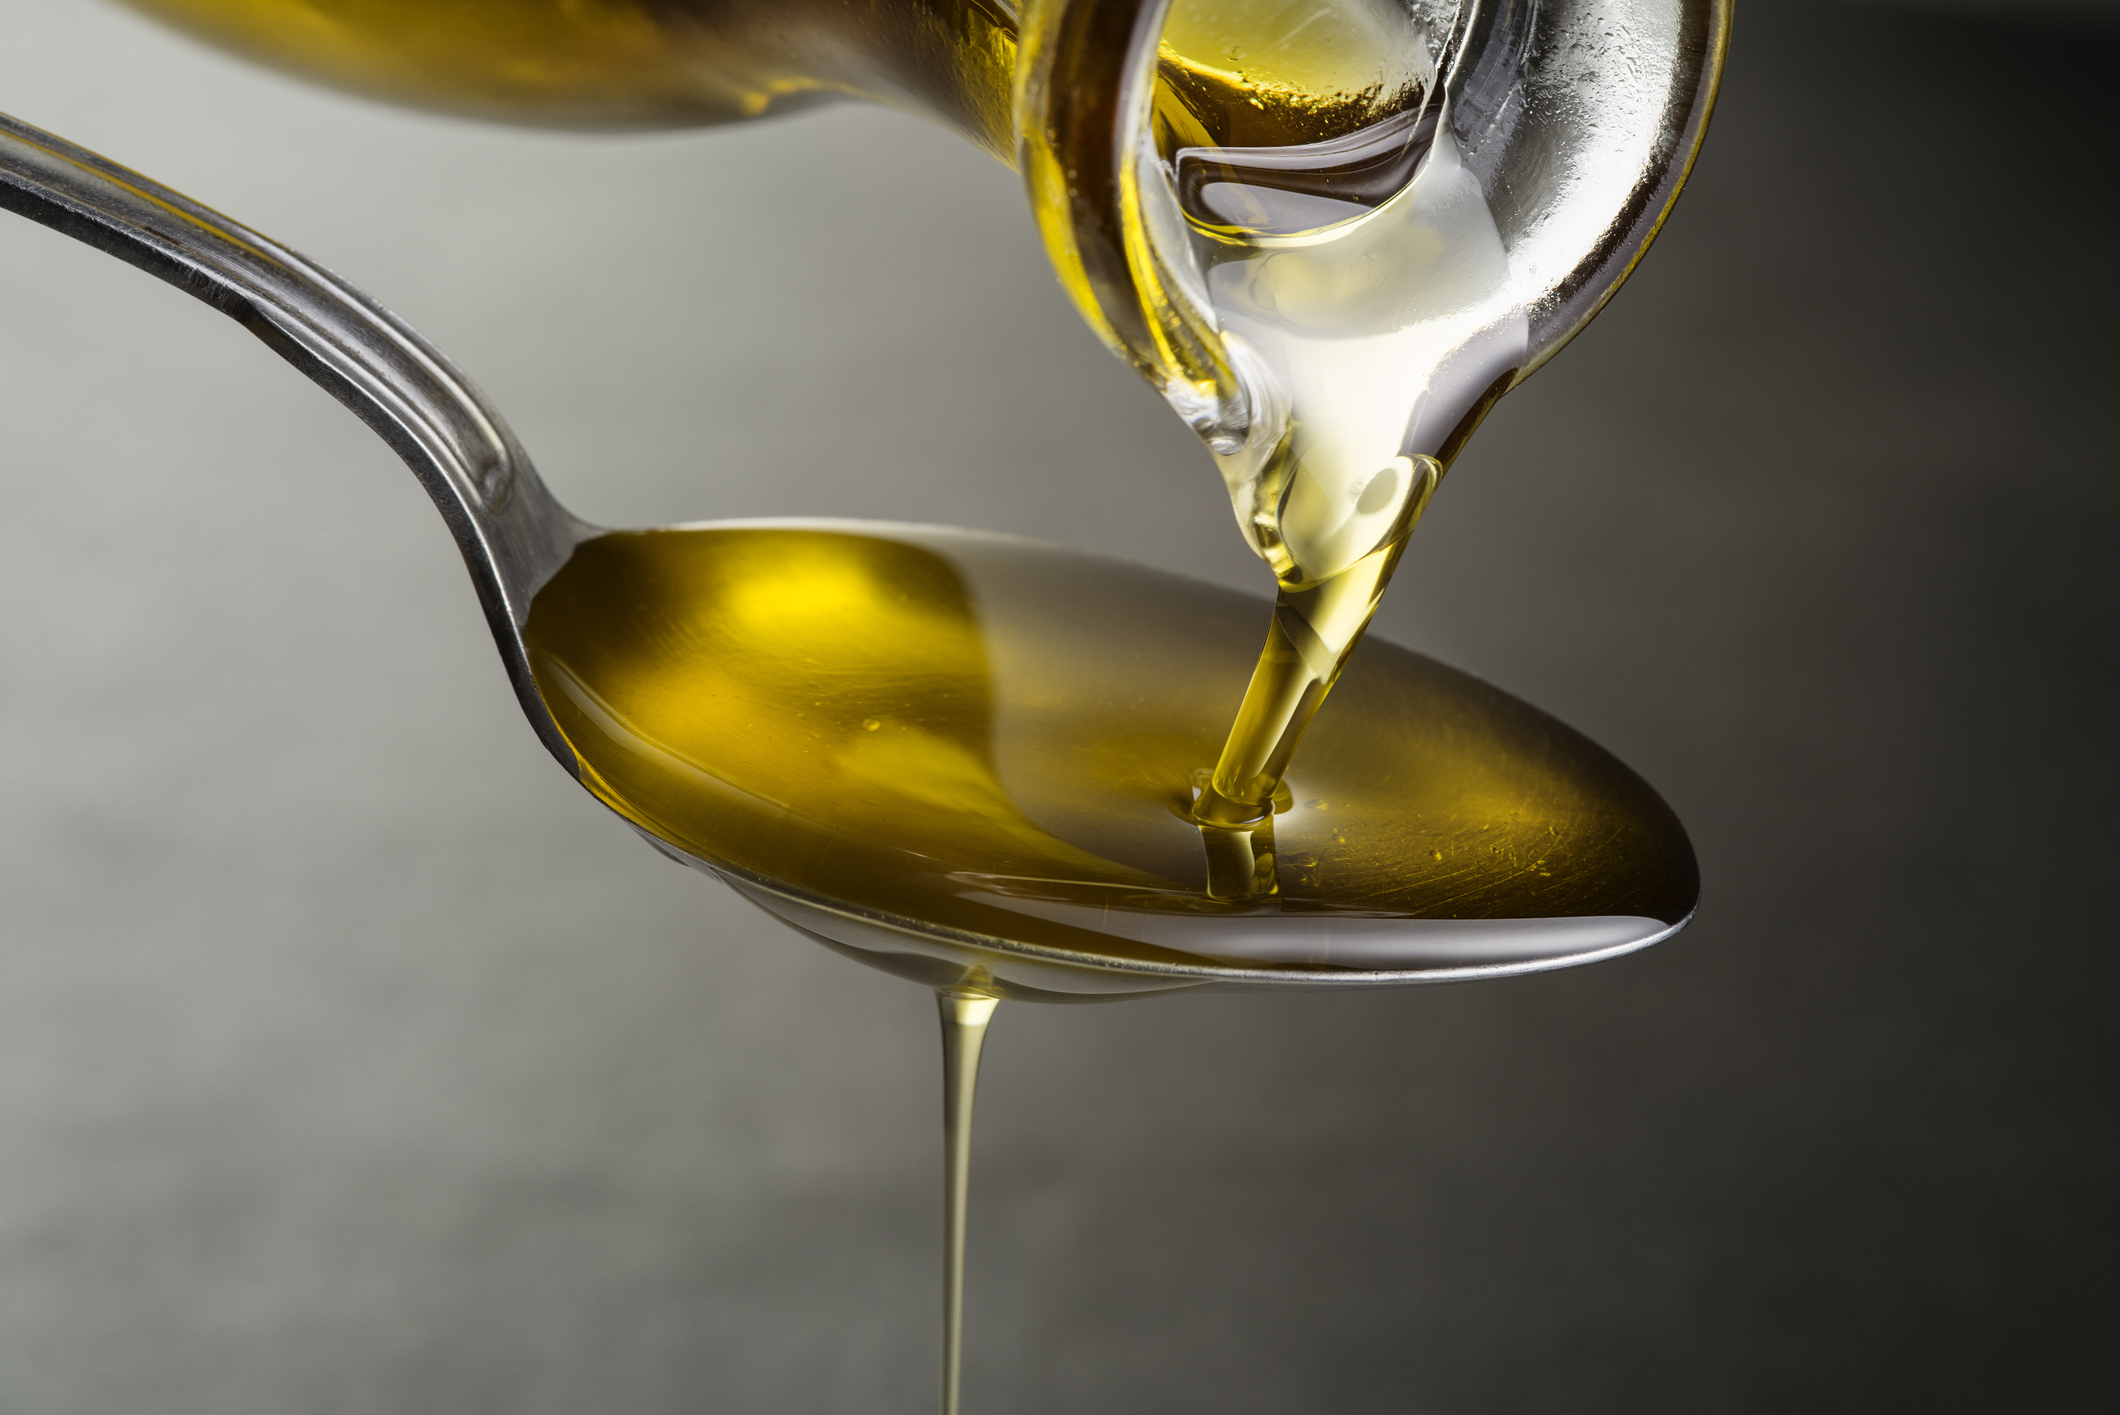 Are These “Healthy” Oils Good for Your Cholesterol? - BlackDoctor.org